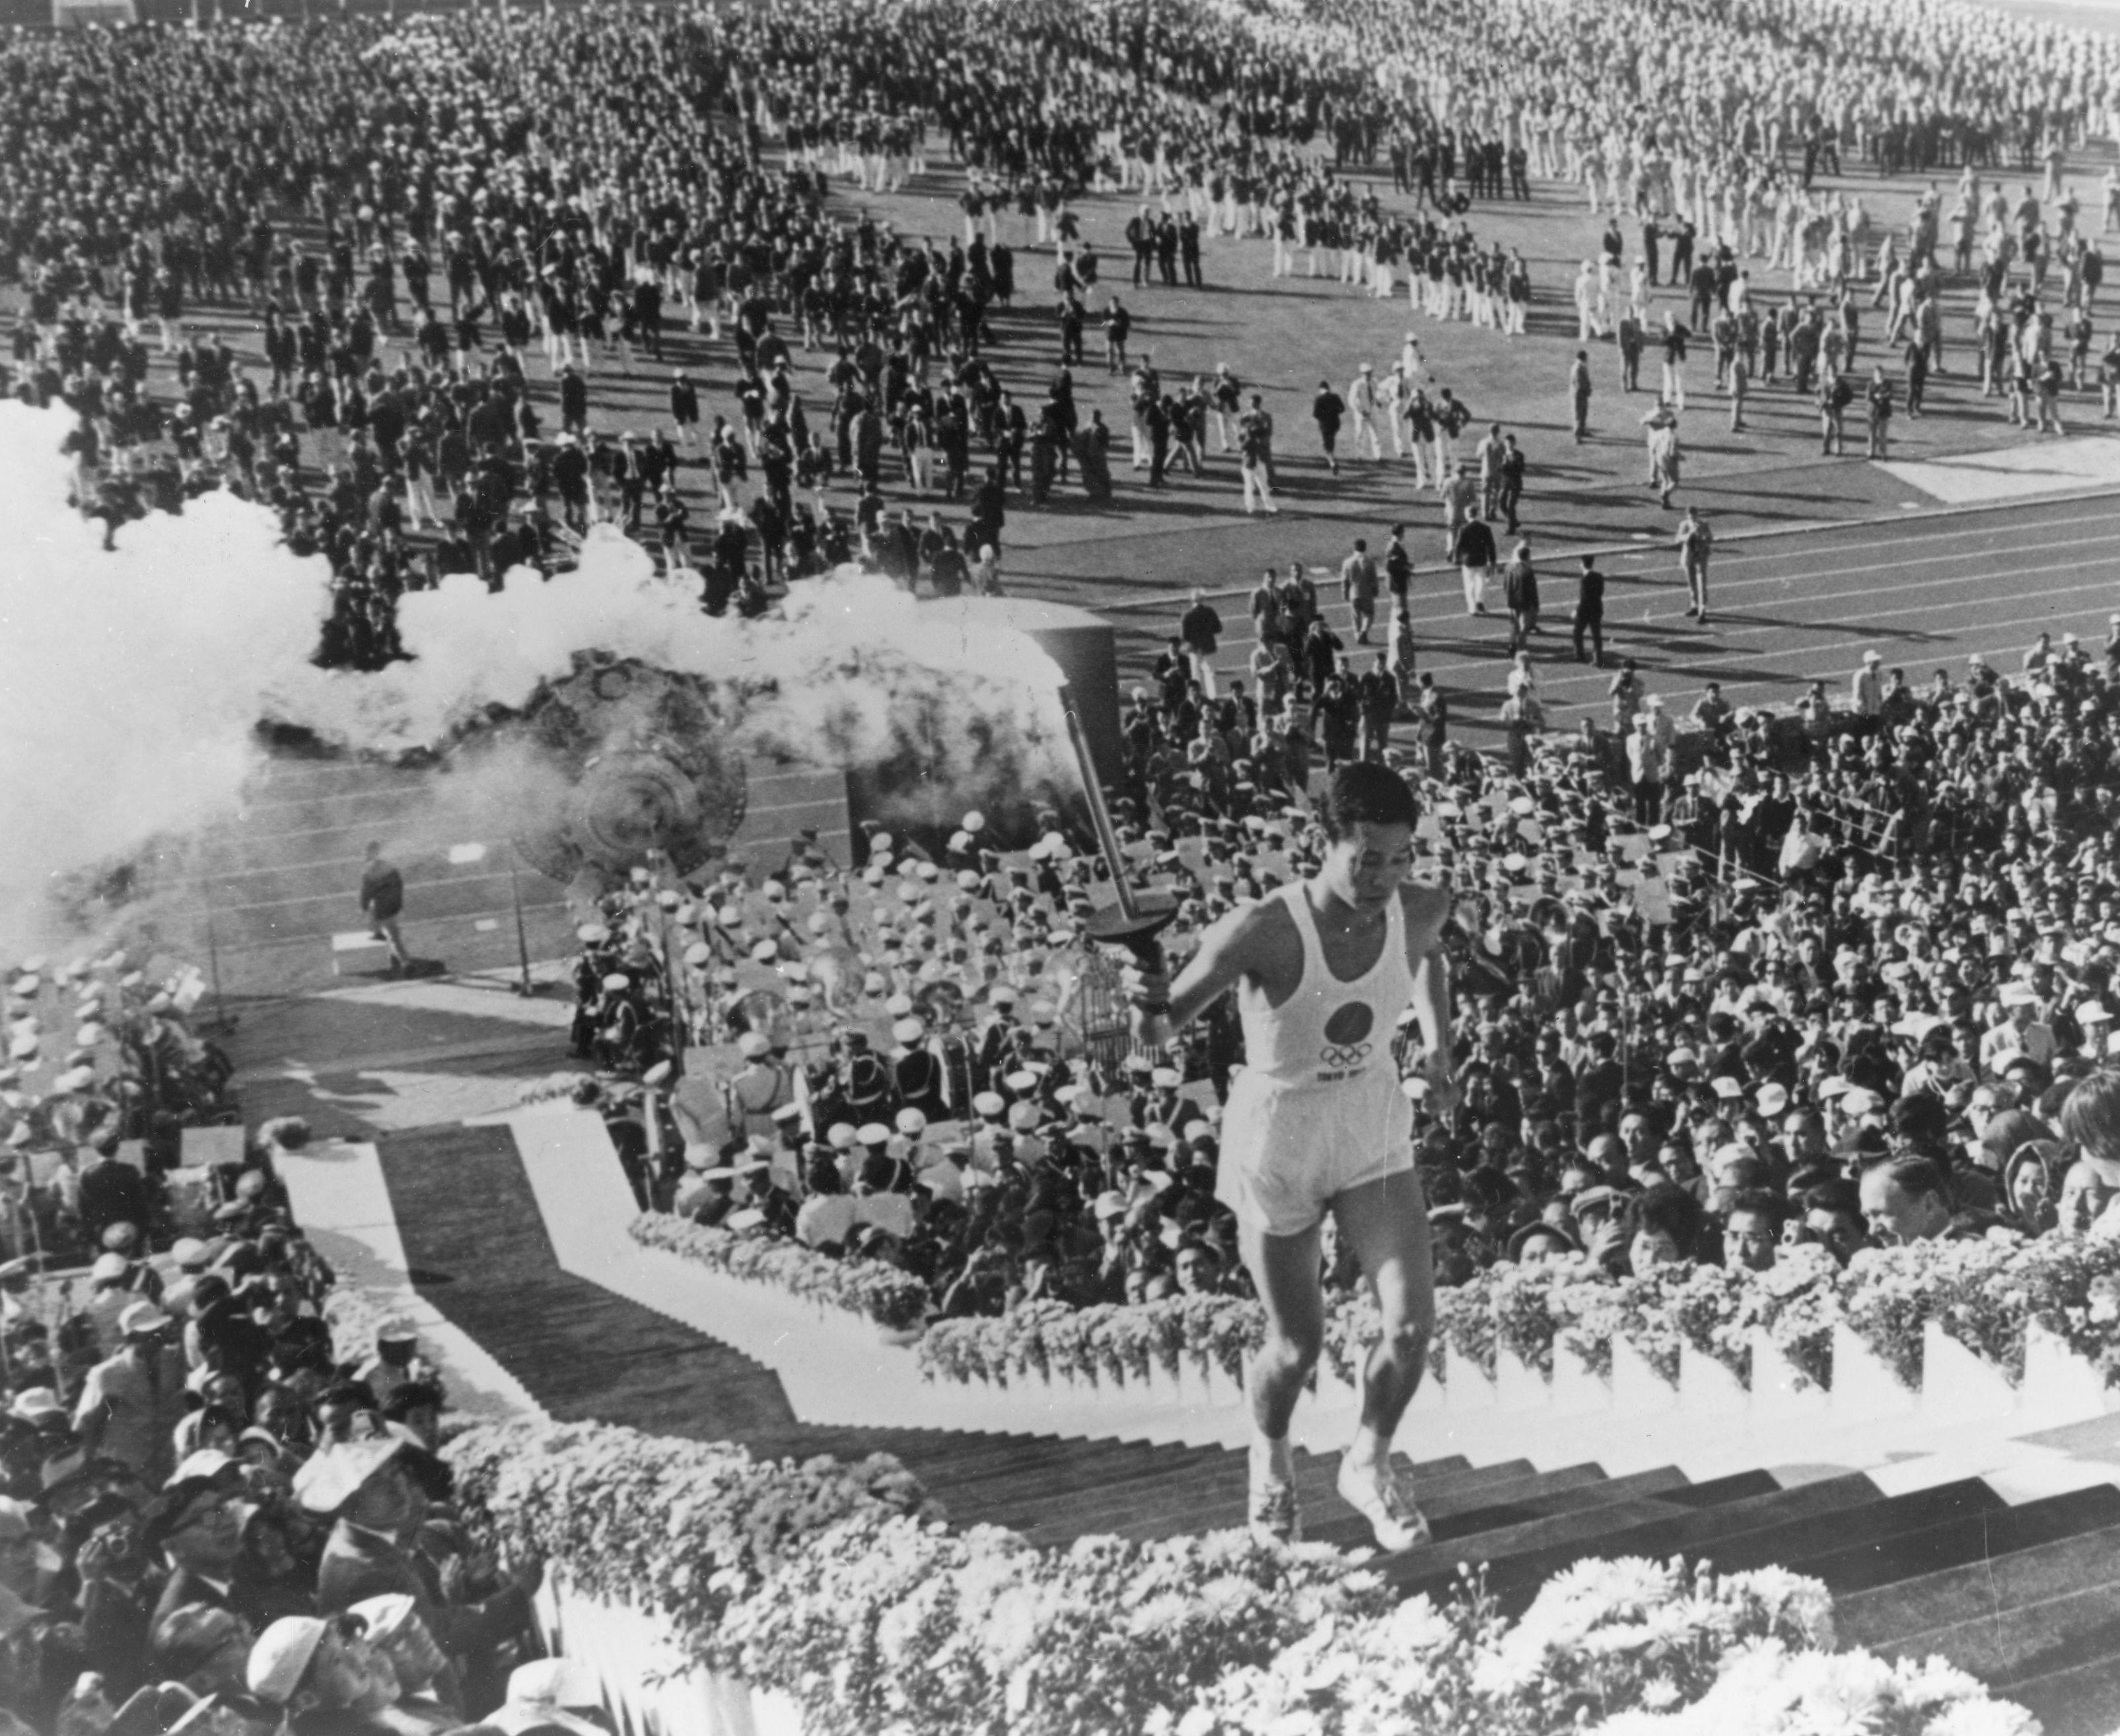 Yoshinori Sakai, a student born in Hiroshima on the day the first atomic bomb devastated the city, during the opening ceremony for the 1964 Tokyo Olympics. Photo: Getty Images